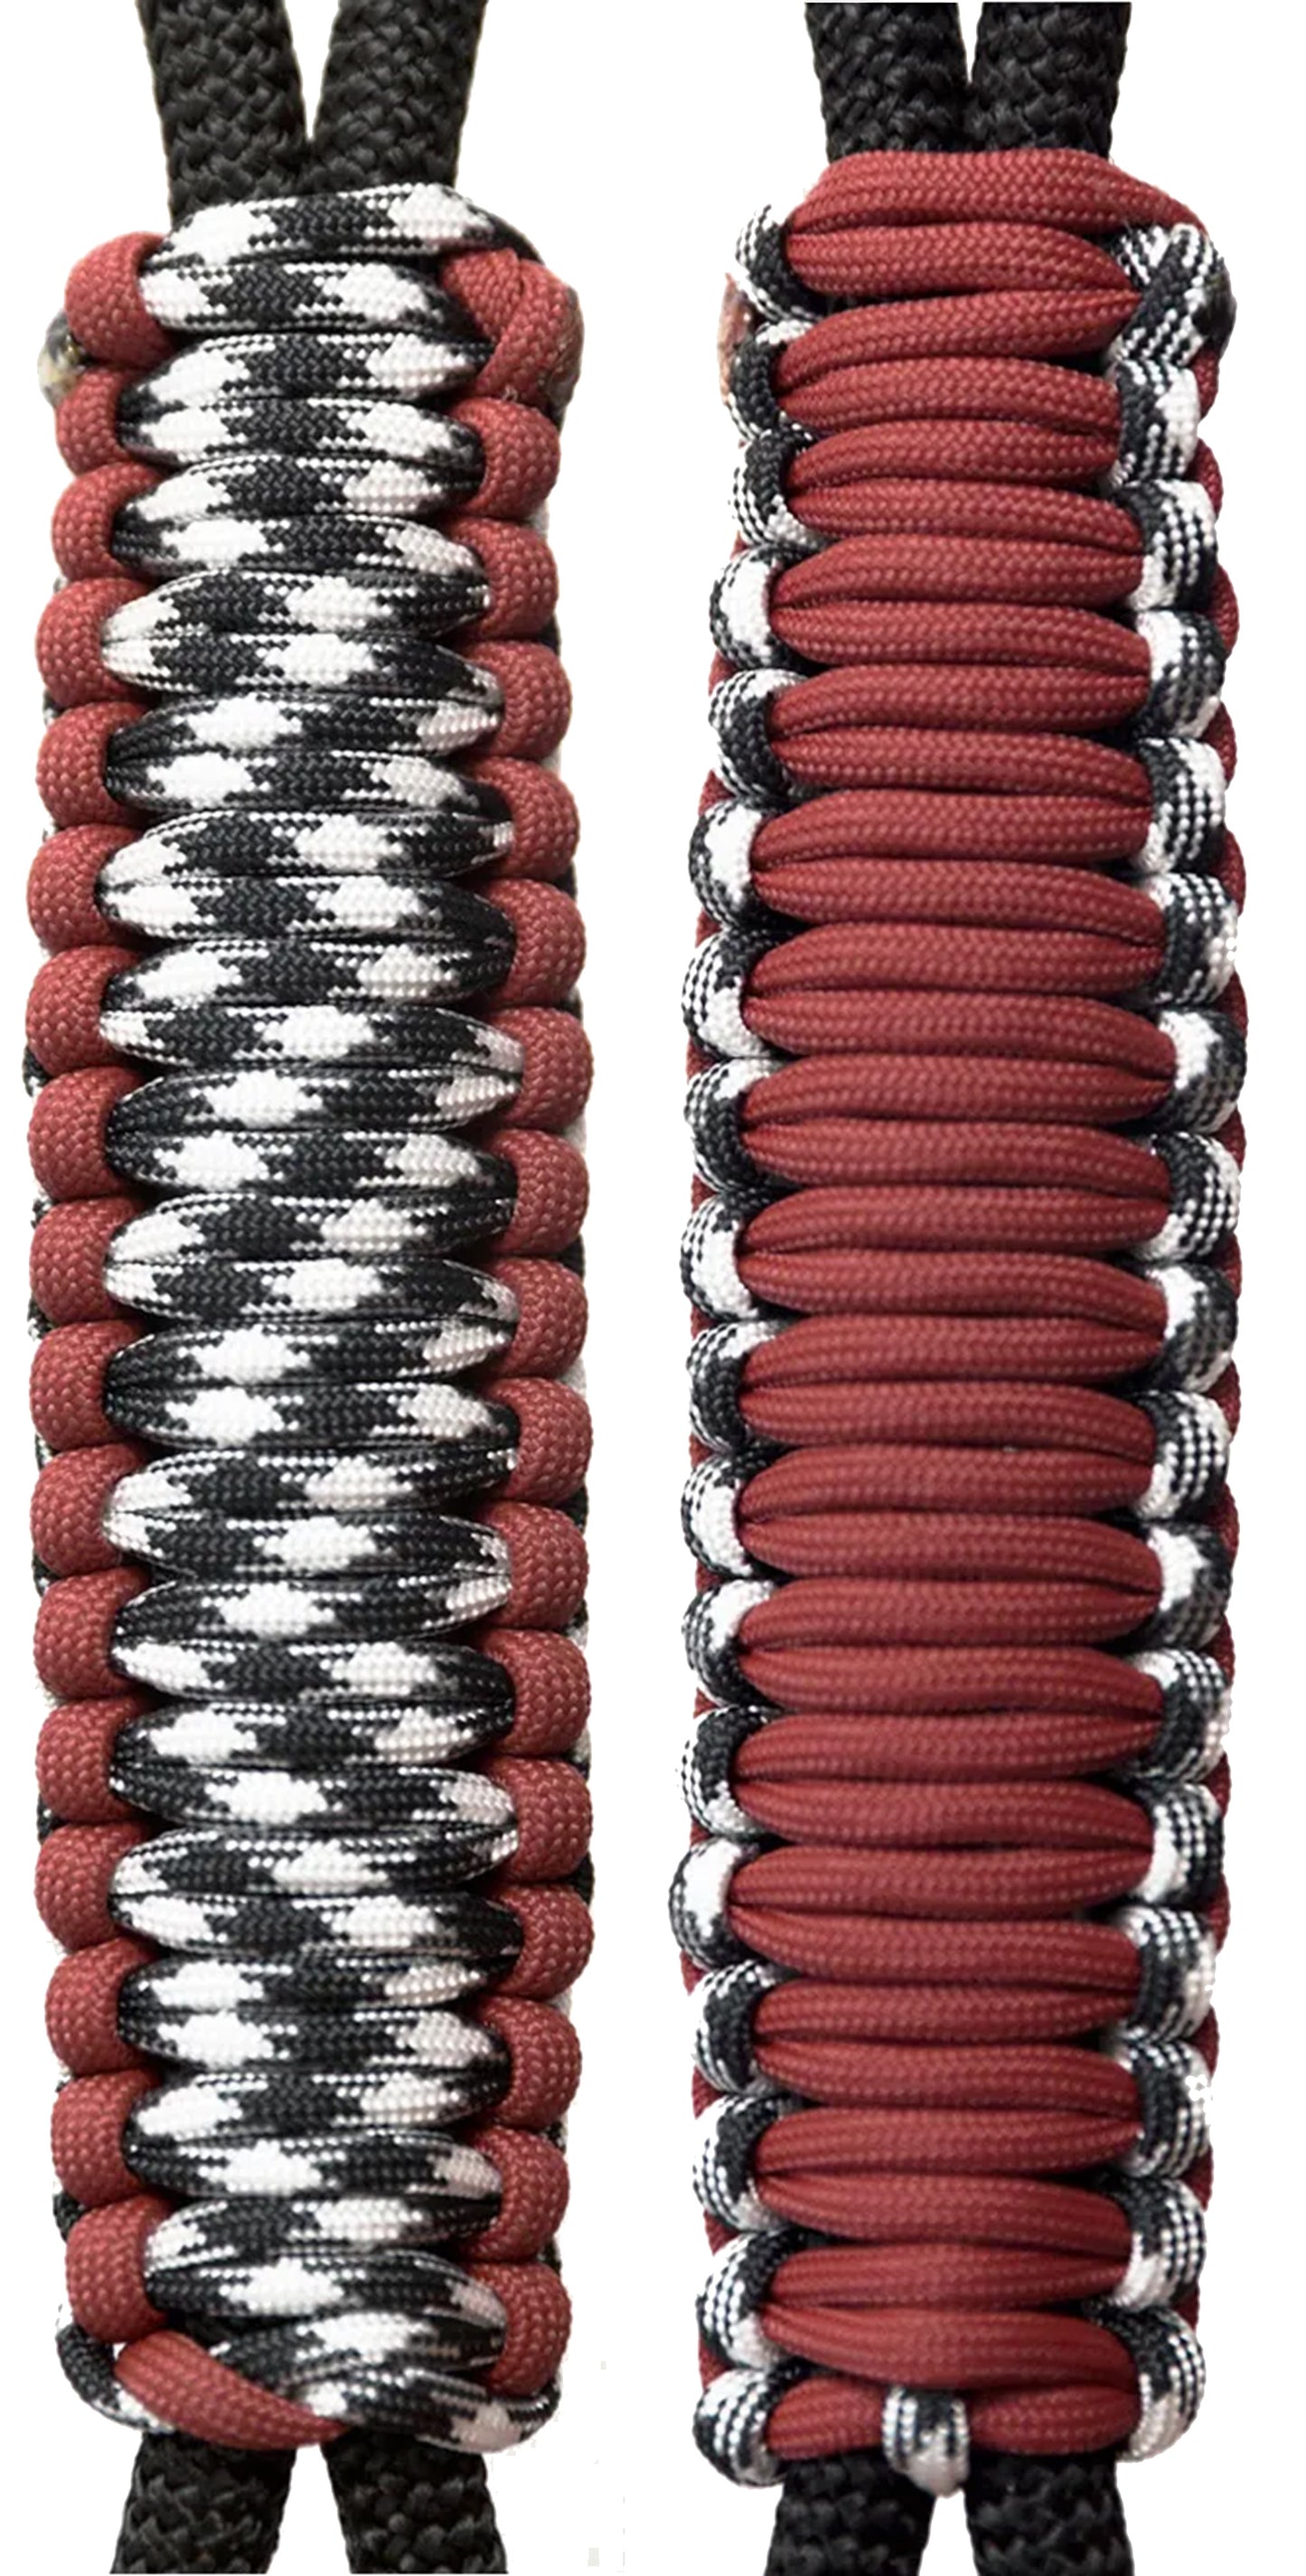 Crimson & Crimson Houndstooth C005C042 - Paracord Handmade Handles for Stainless Steel Tumblers - Made in USA!